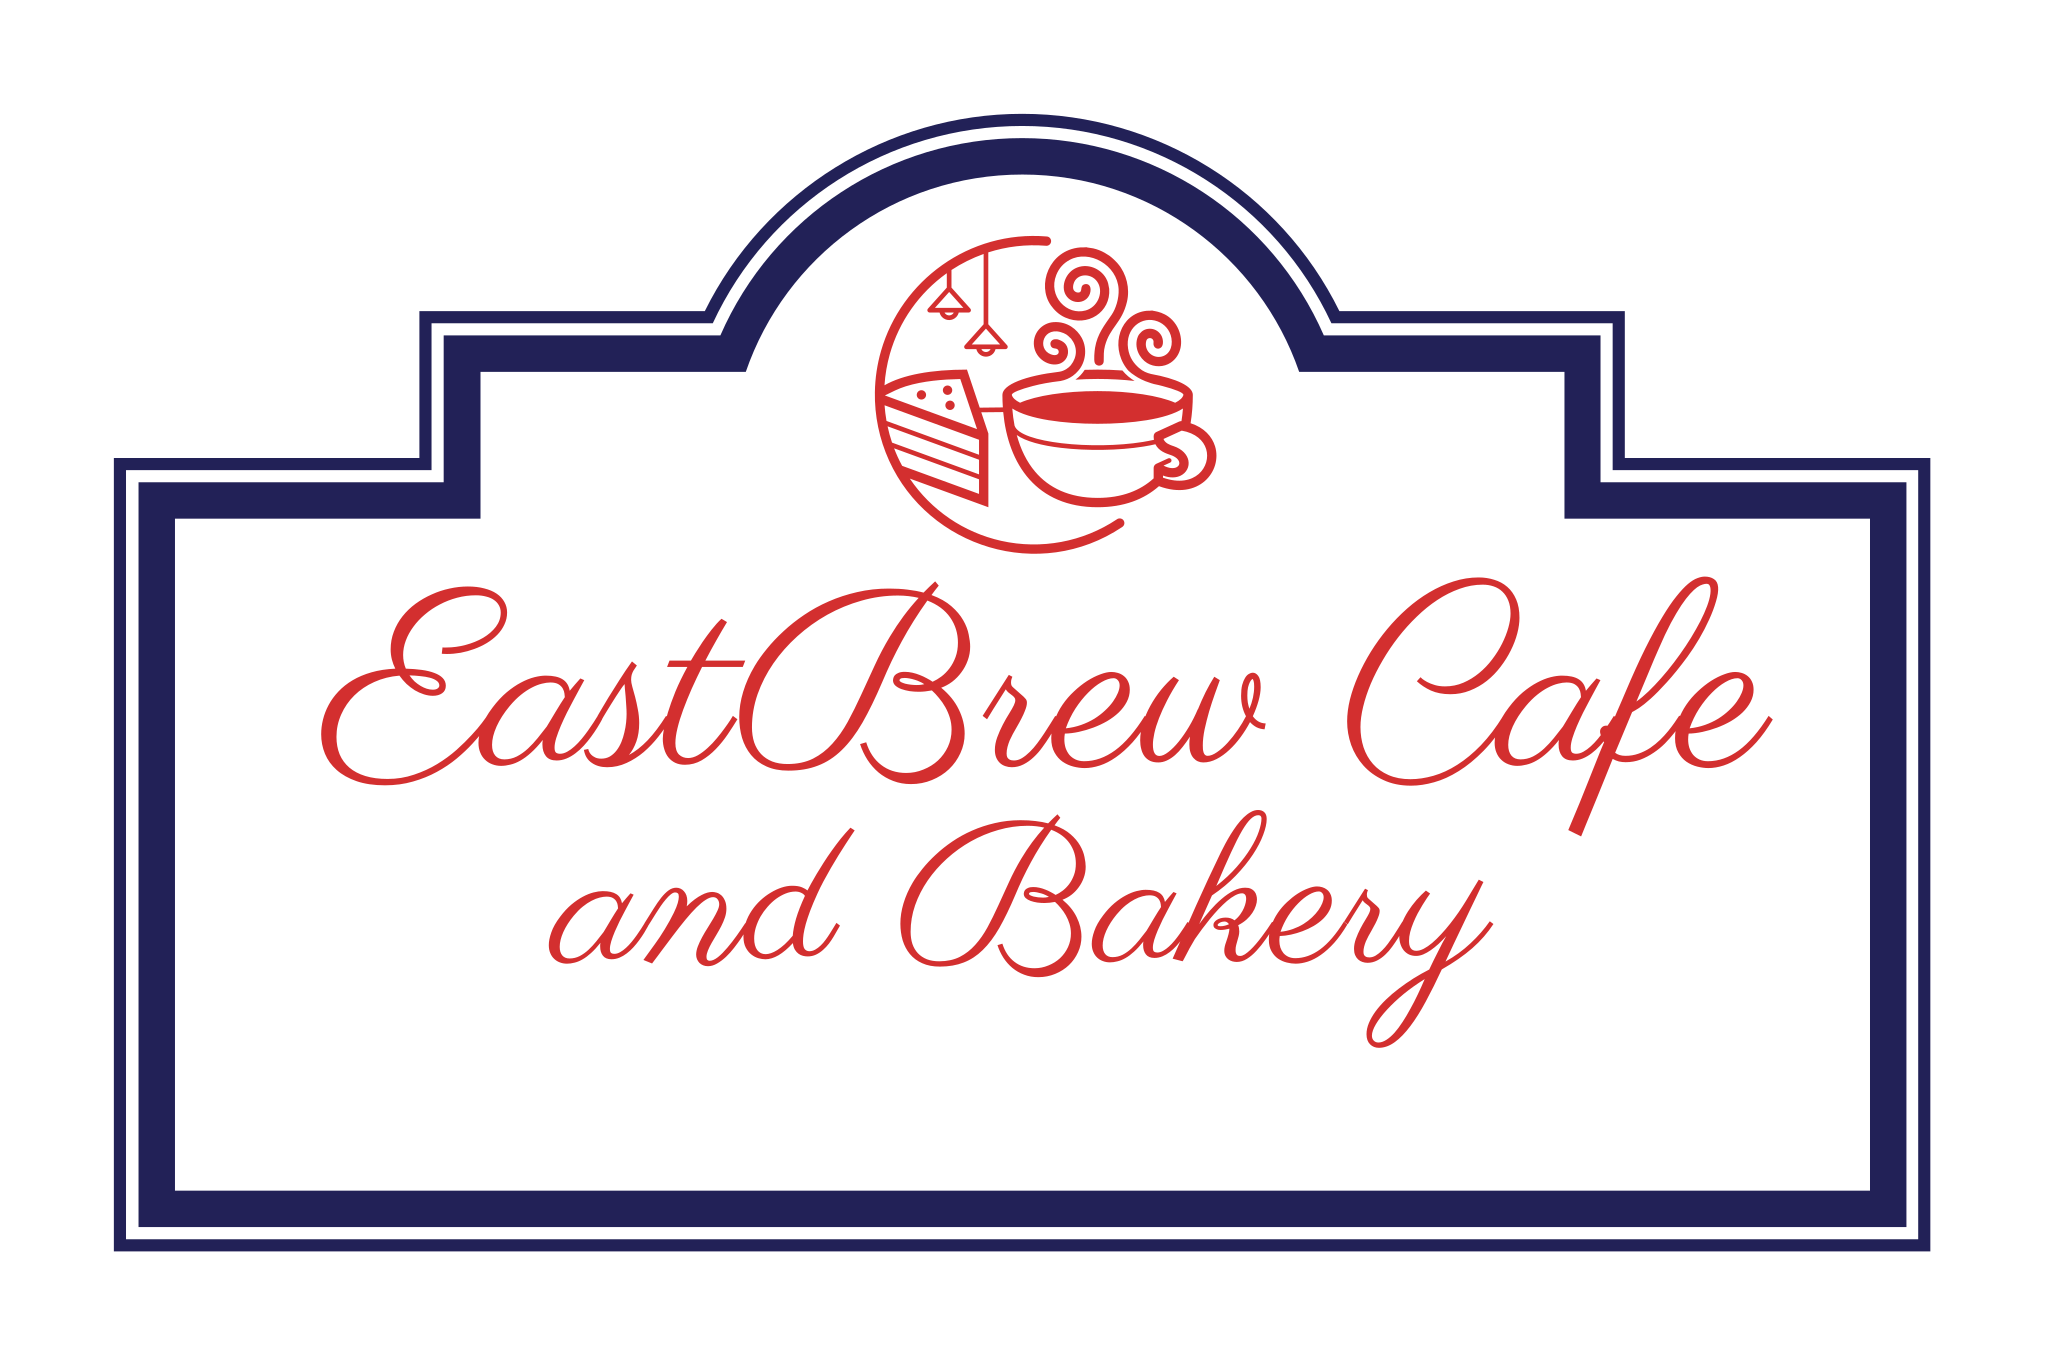 EASTBREW CAFE AND BAKERY